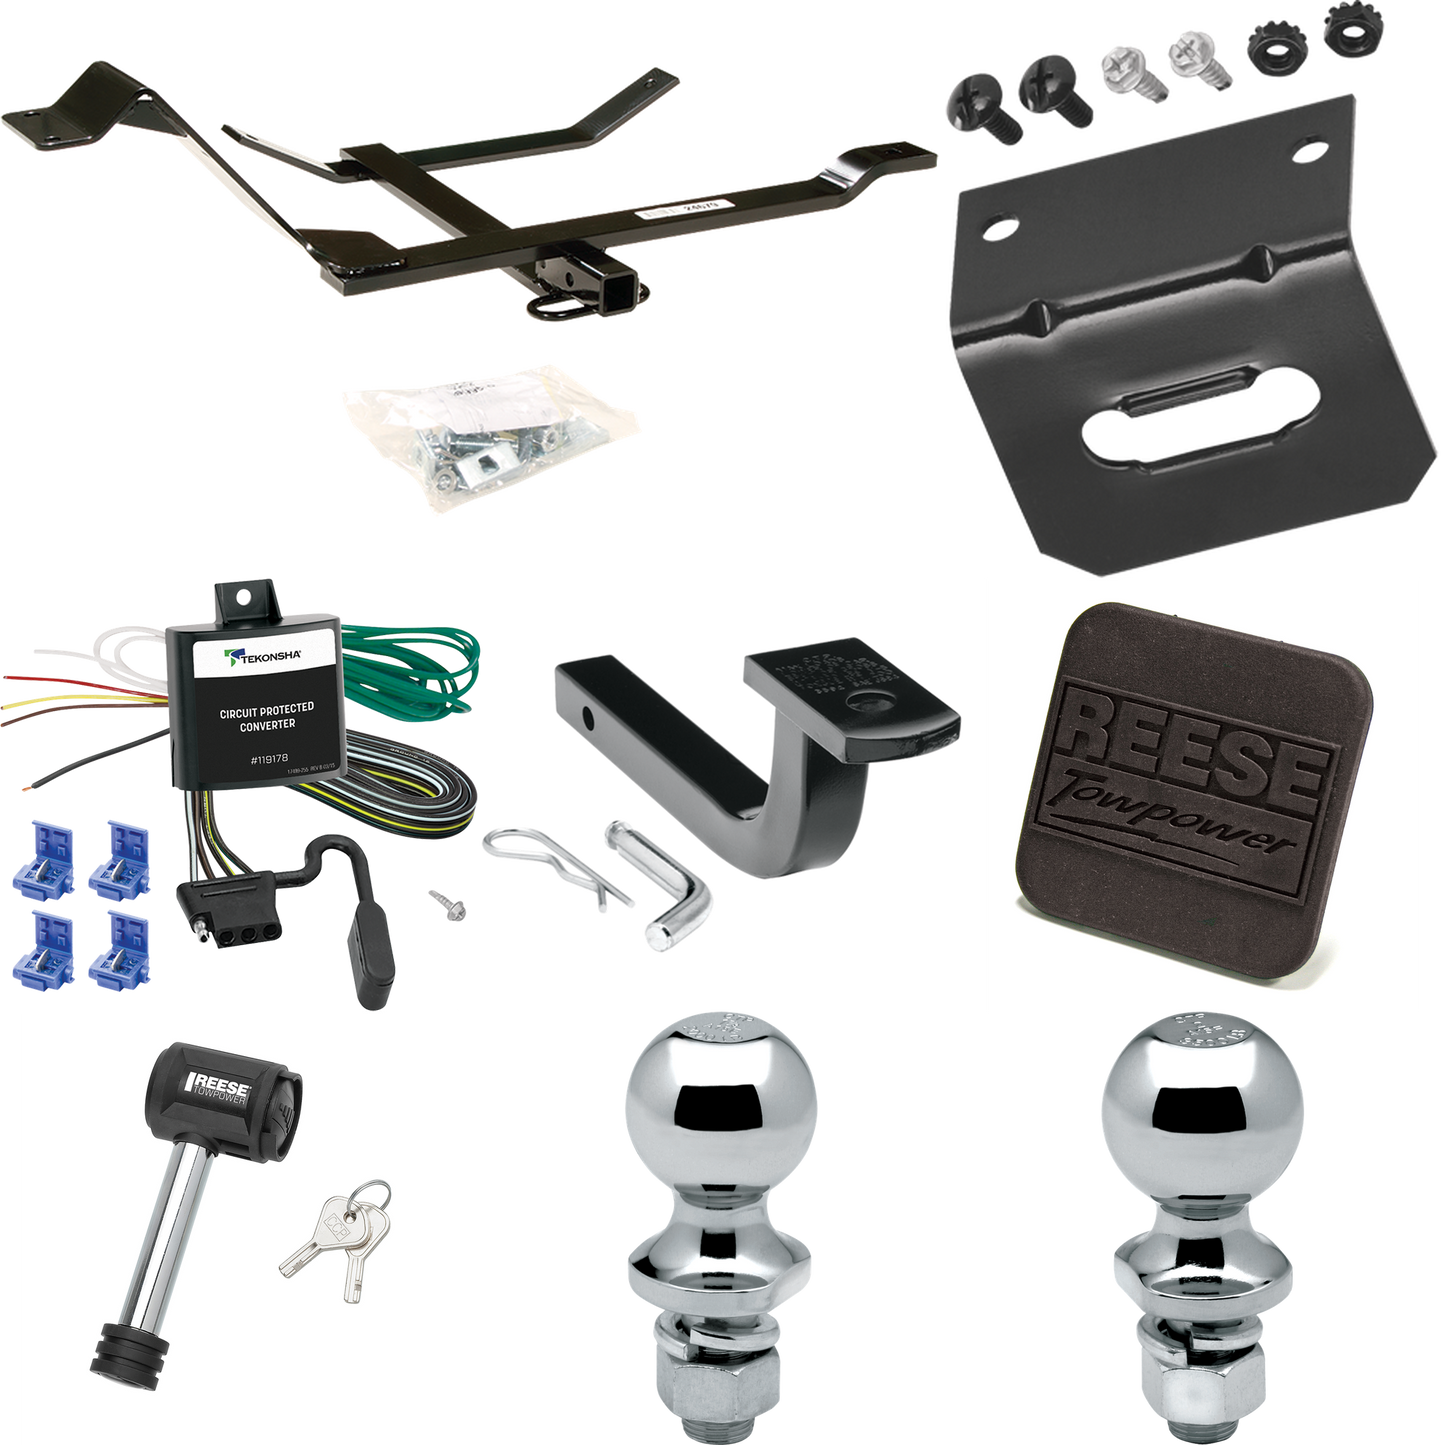 Fits 1999-2006 Volkswagen Golf Trailer Hitch Tow PKG w/ 4-Flat Wiring Harness + Draw-Bar + 1-7/8" + 2" Ball + Wiring Bracket + Hitch Cover + Hitch Lock By Reese Towpower